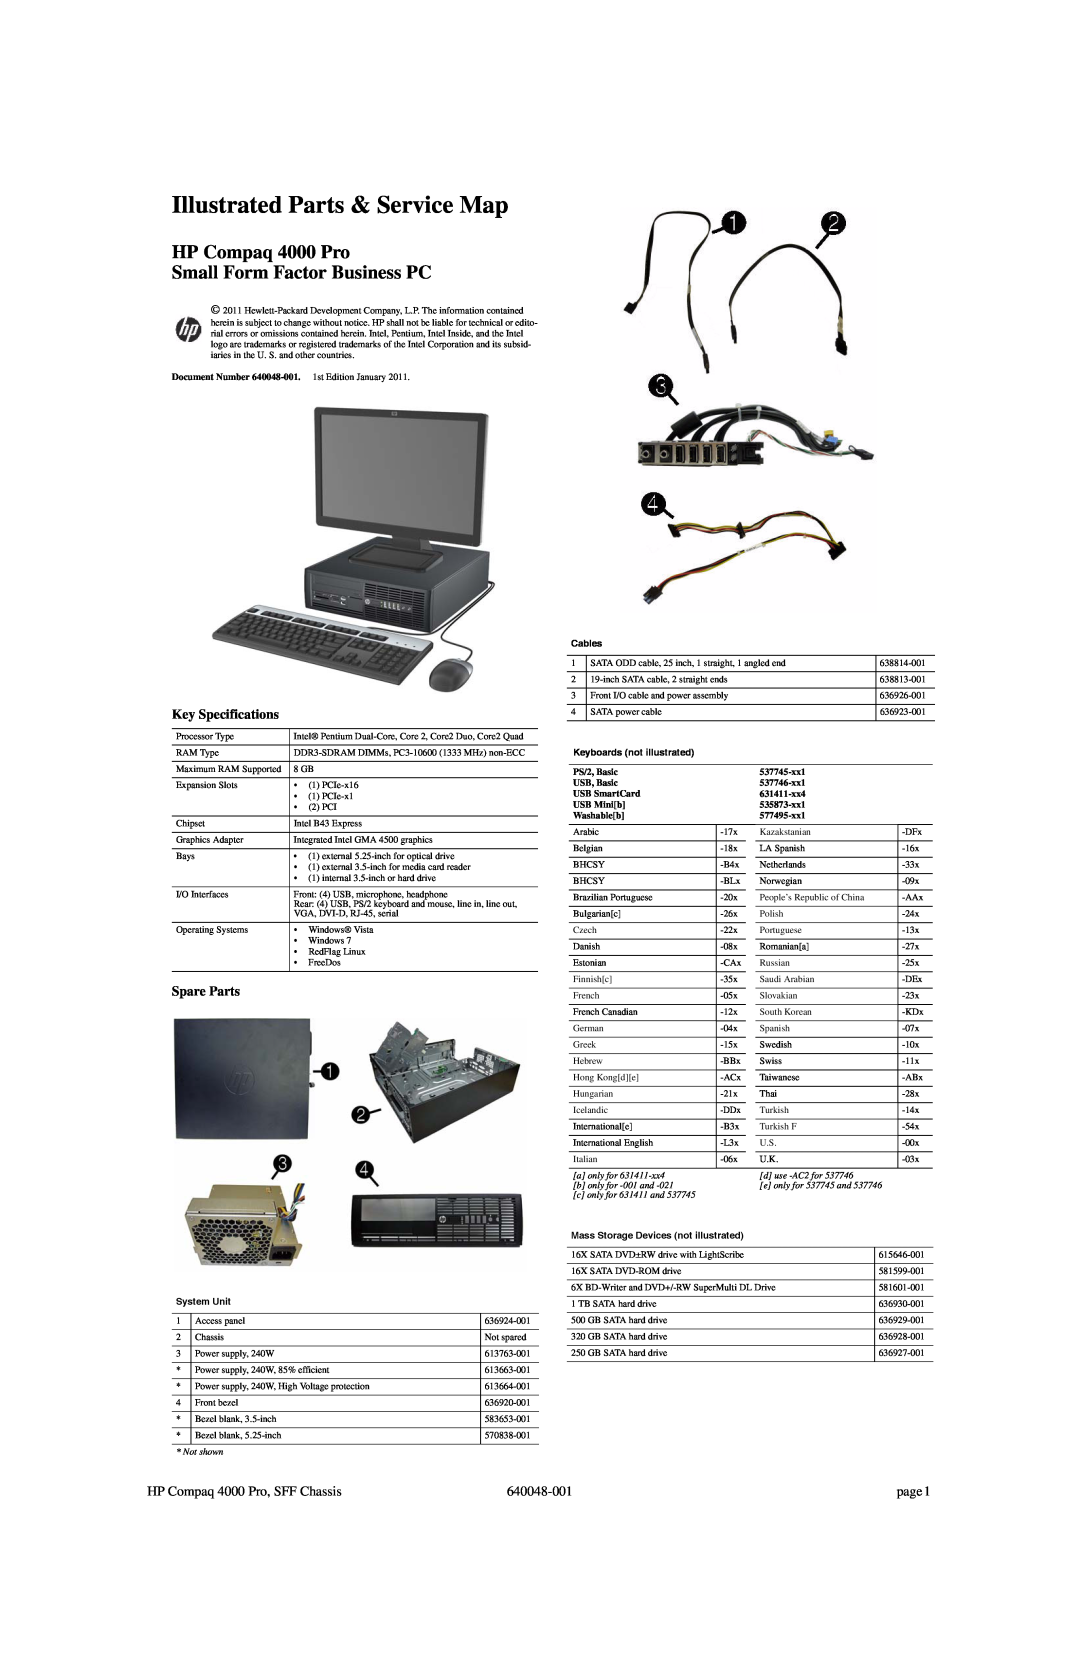 HP manual Key Specifications, Spare Parts, HP Compaq 4000 Pro, SFF Chassis, 640048-001, page, Not shown, a only for 